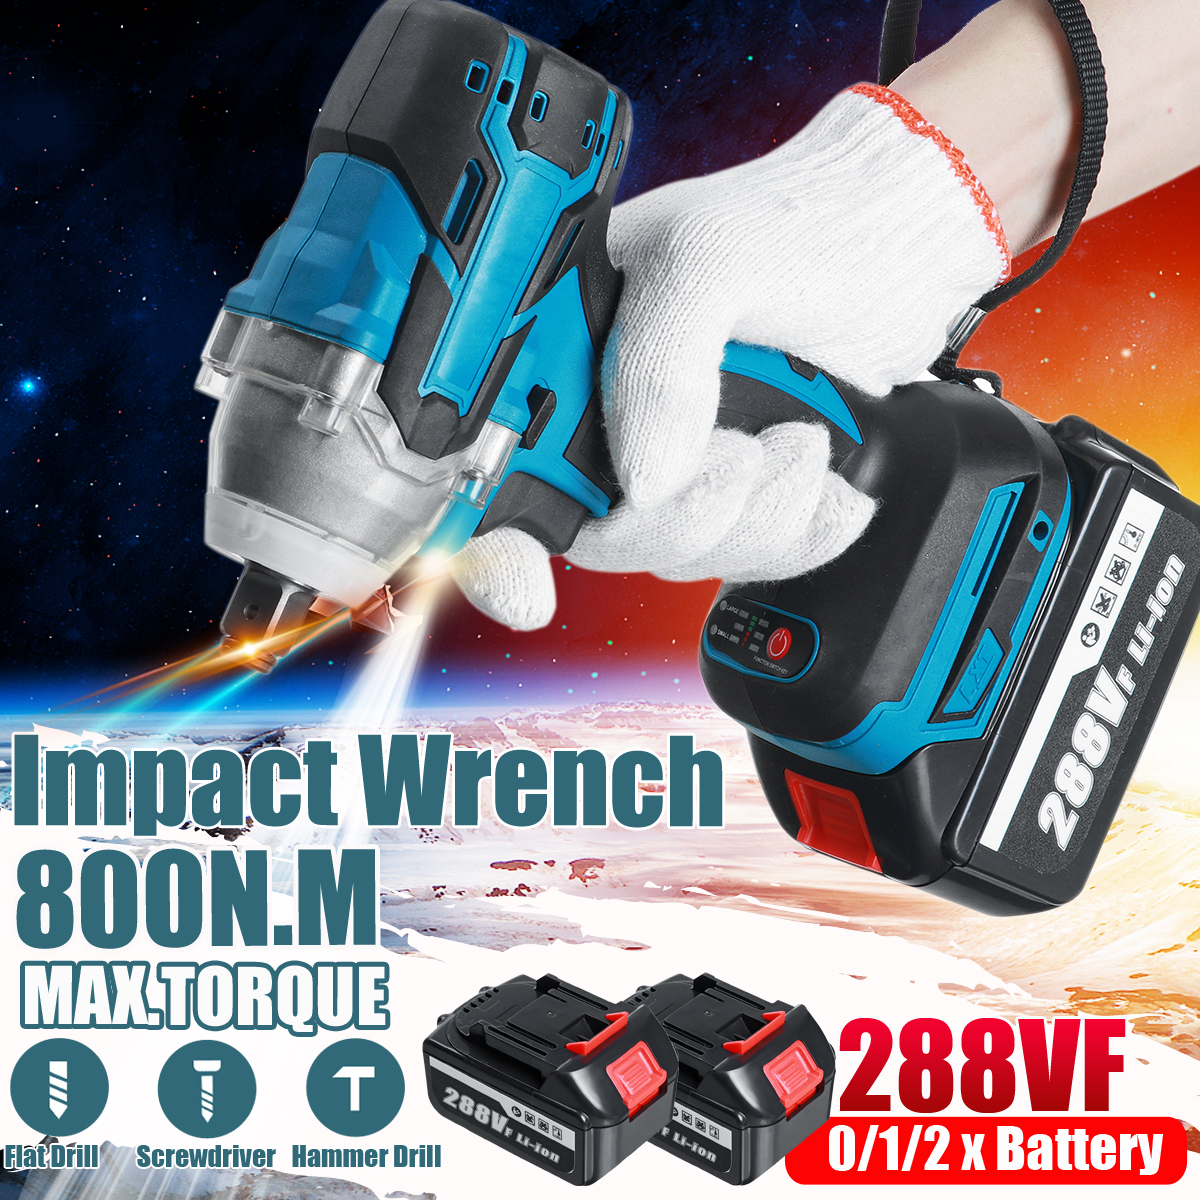 288VF-21V-350NM-Cordless-Brushless-Impact-Wrench-Drill-Portable-Electric-Wrench-W-None1pc2pcs-Batter-1813785-1